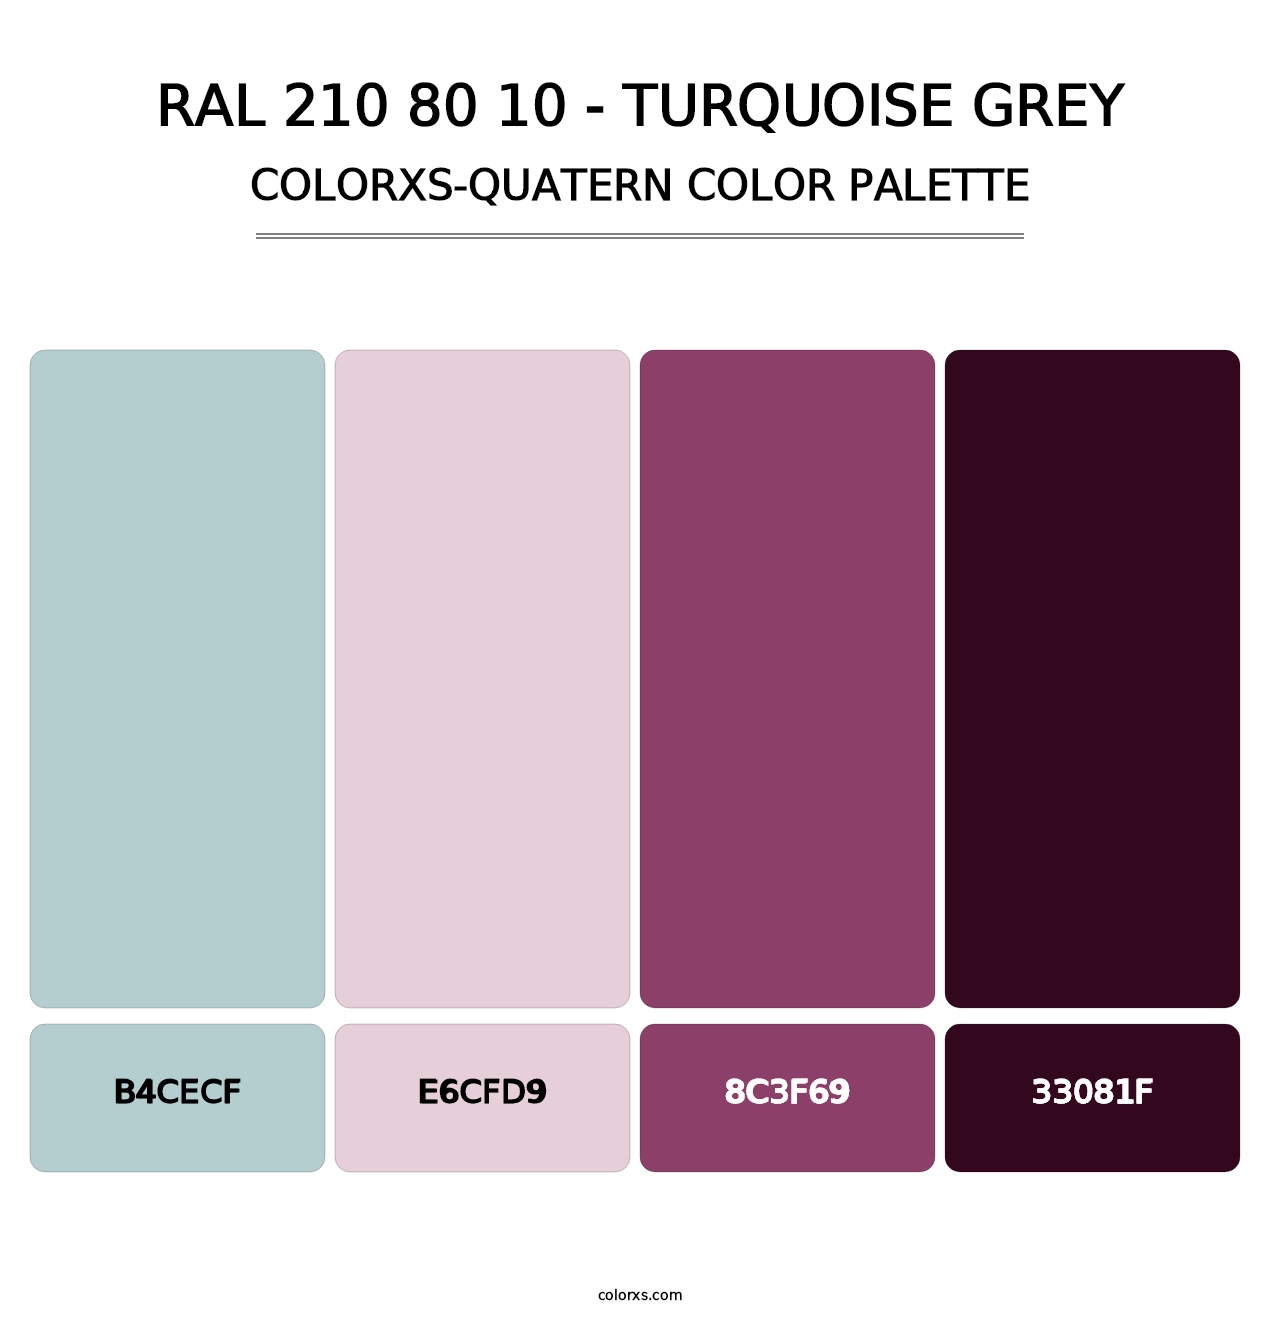 RAL 210 80 10 - Turquoise Grey - Colorxs Quatern Palette